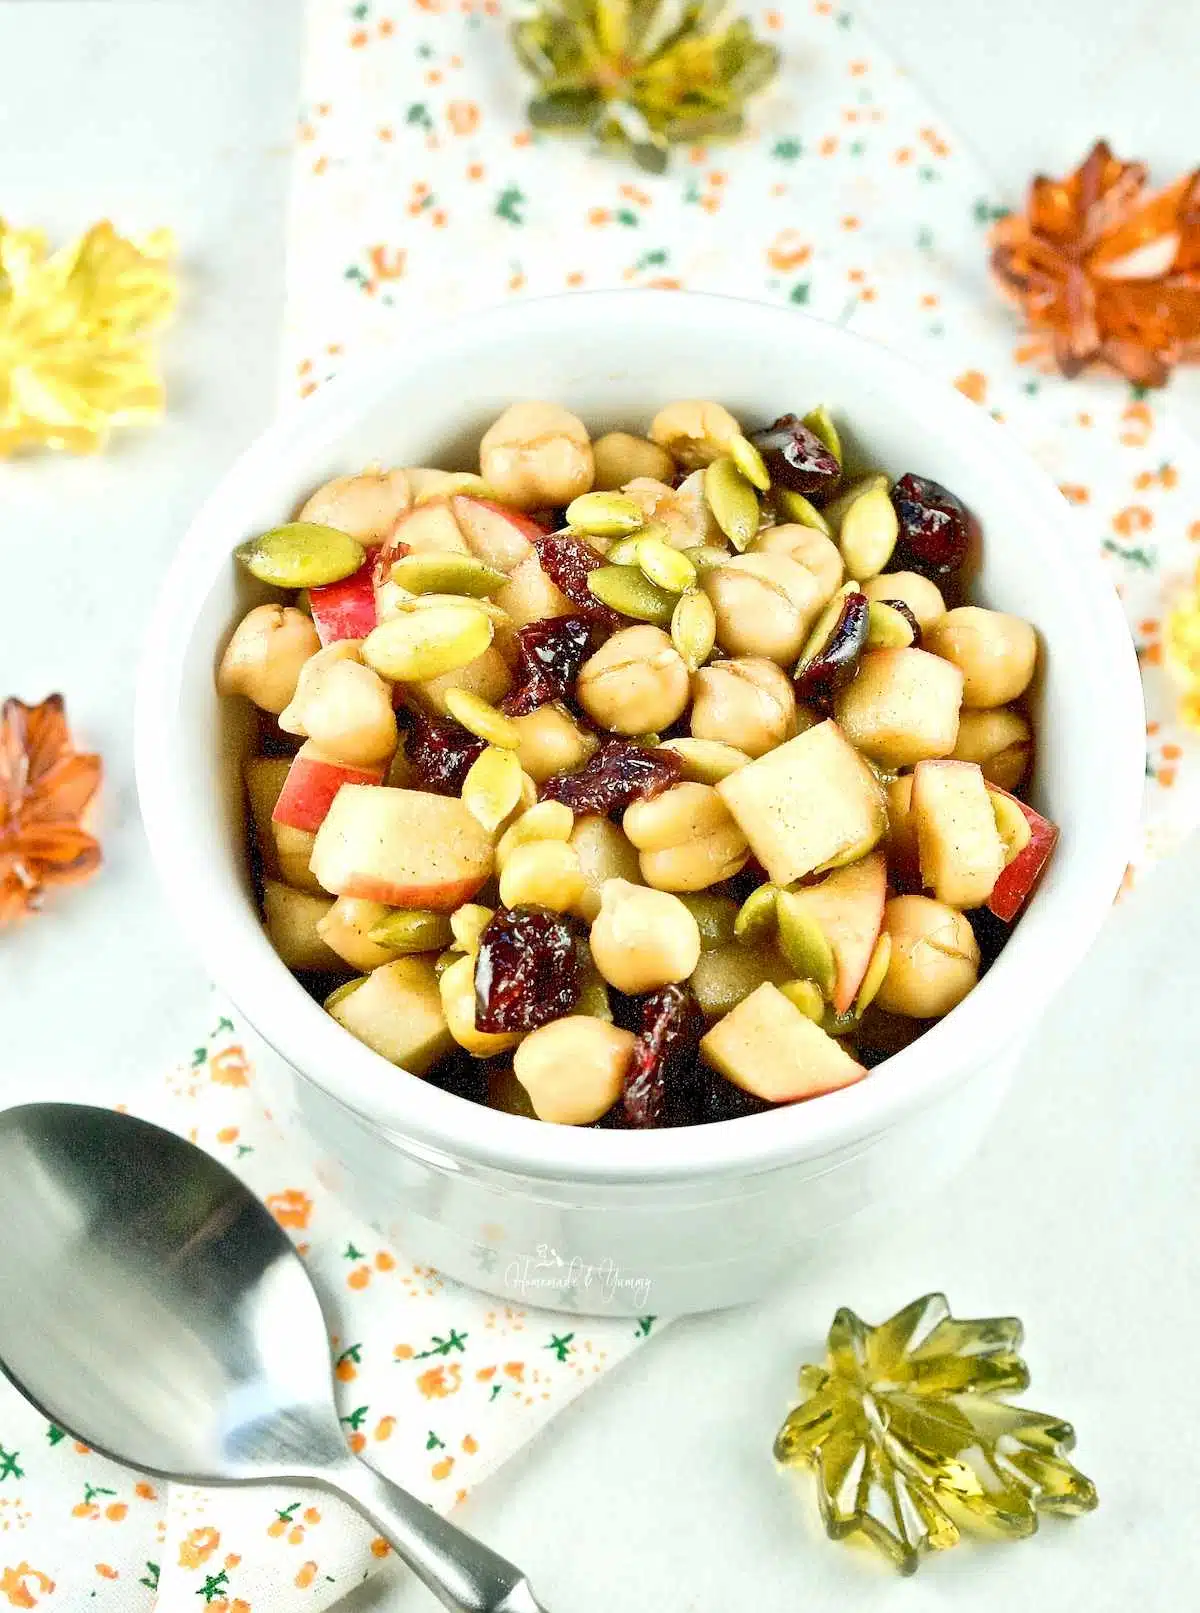 Apple Chickpea Salad in a white bowl ready to eat.